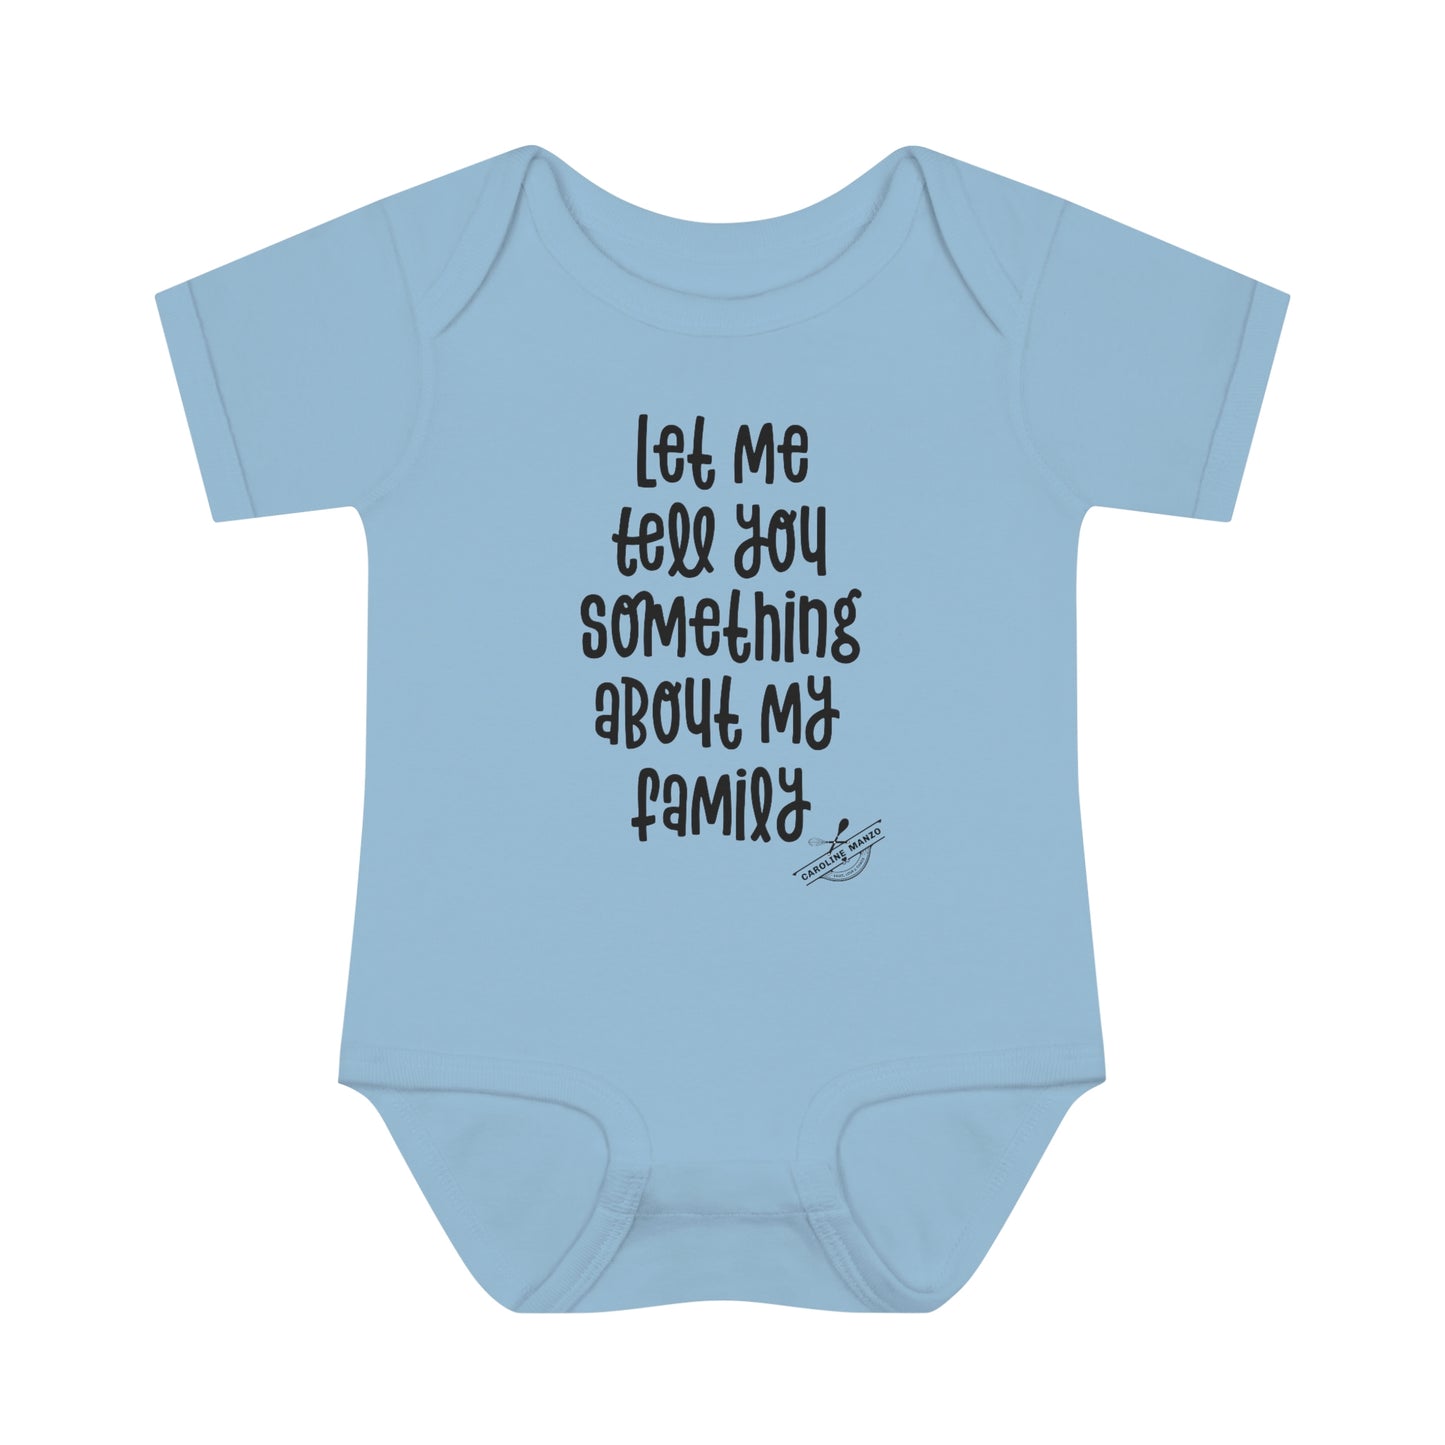 "Let me tell you something about my family" baby onesie (black lettering)